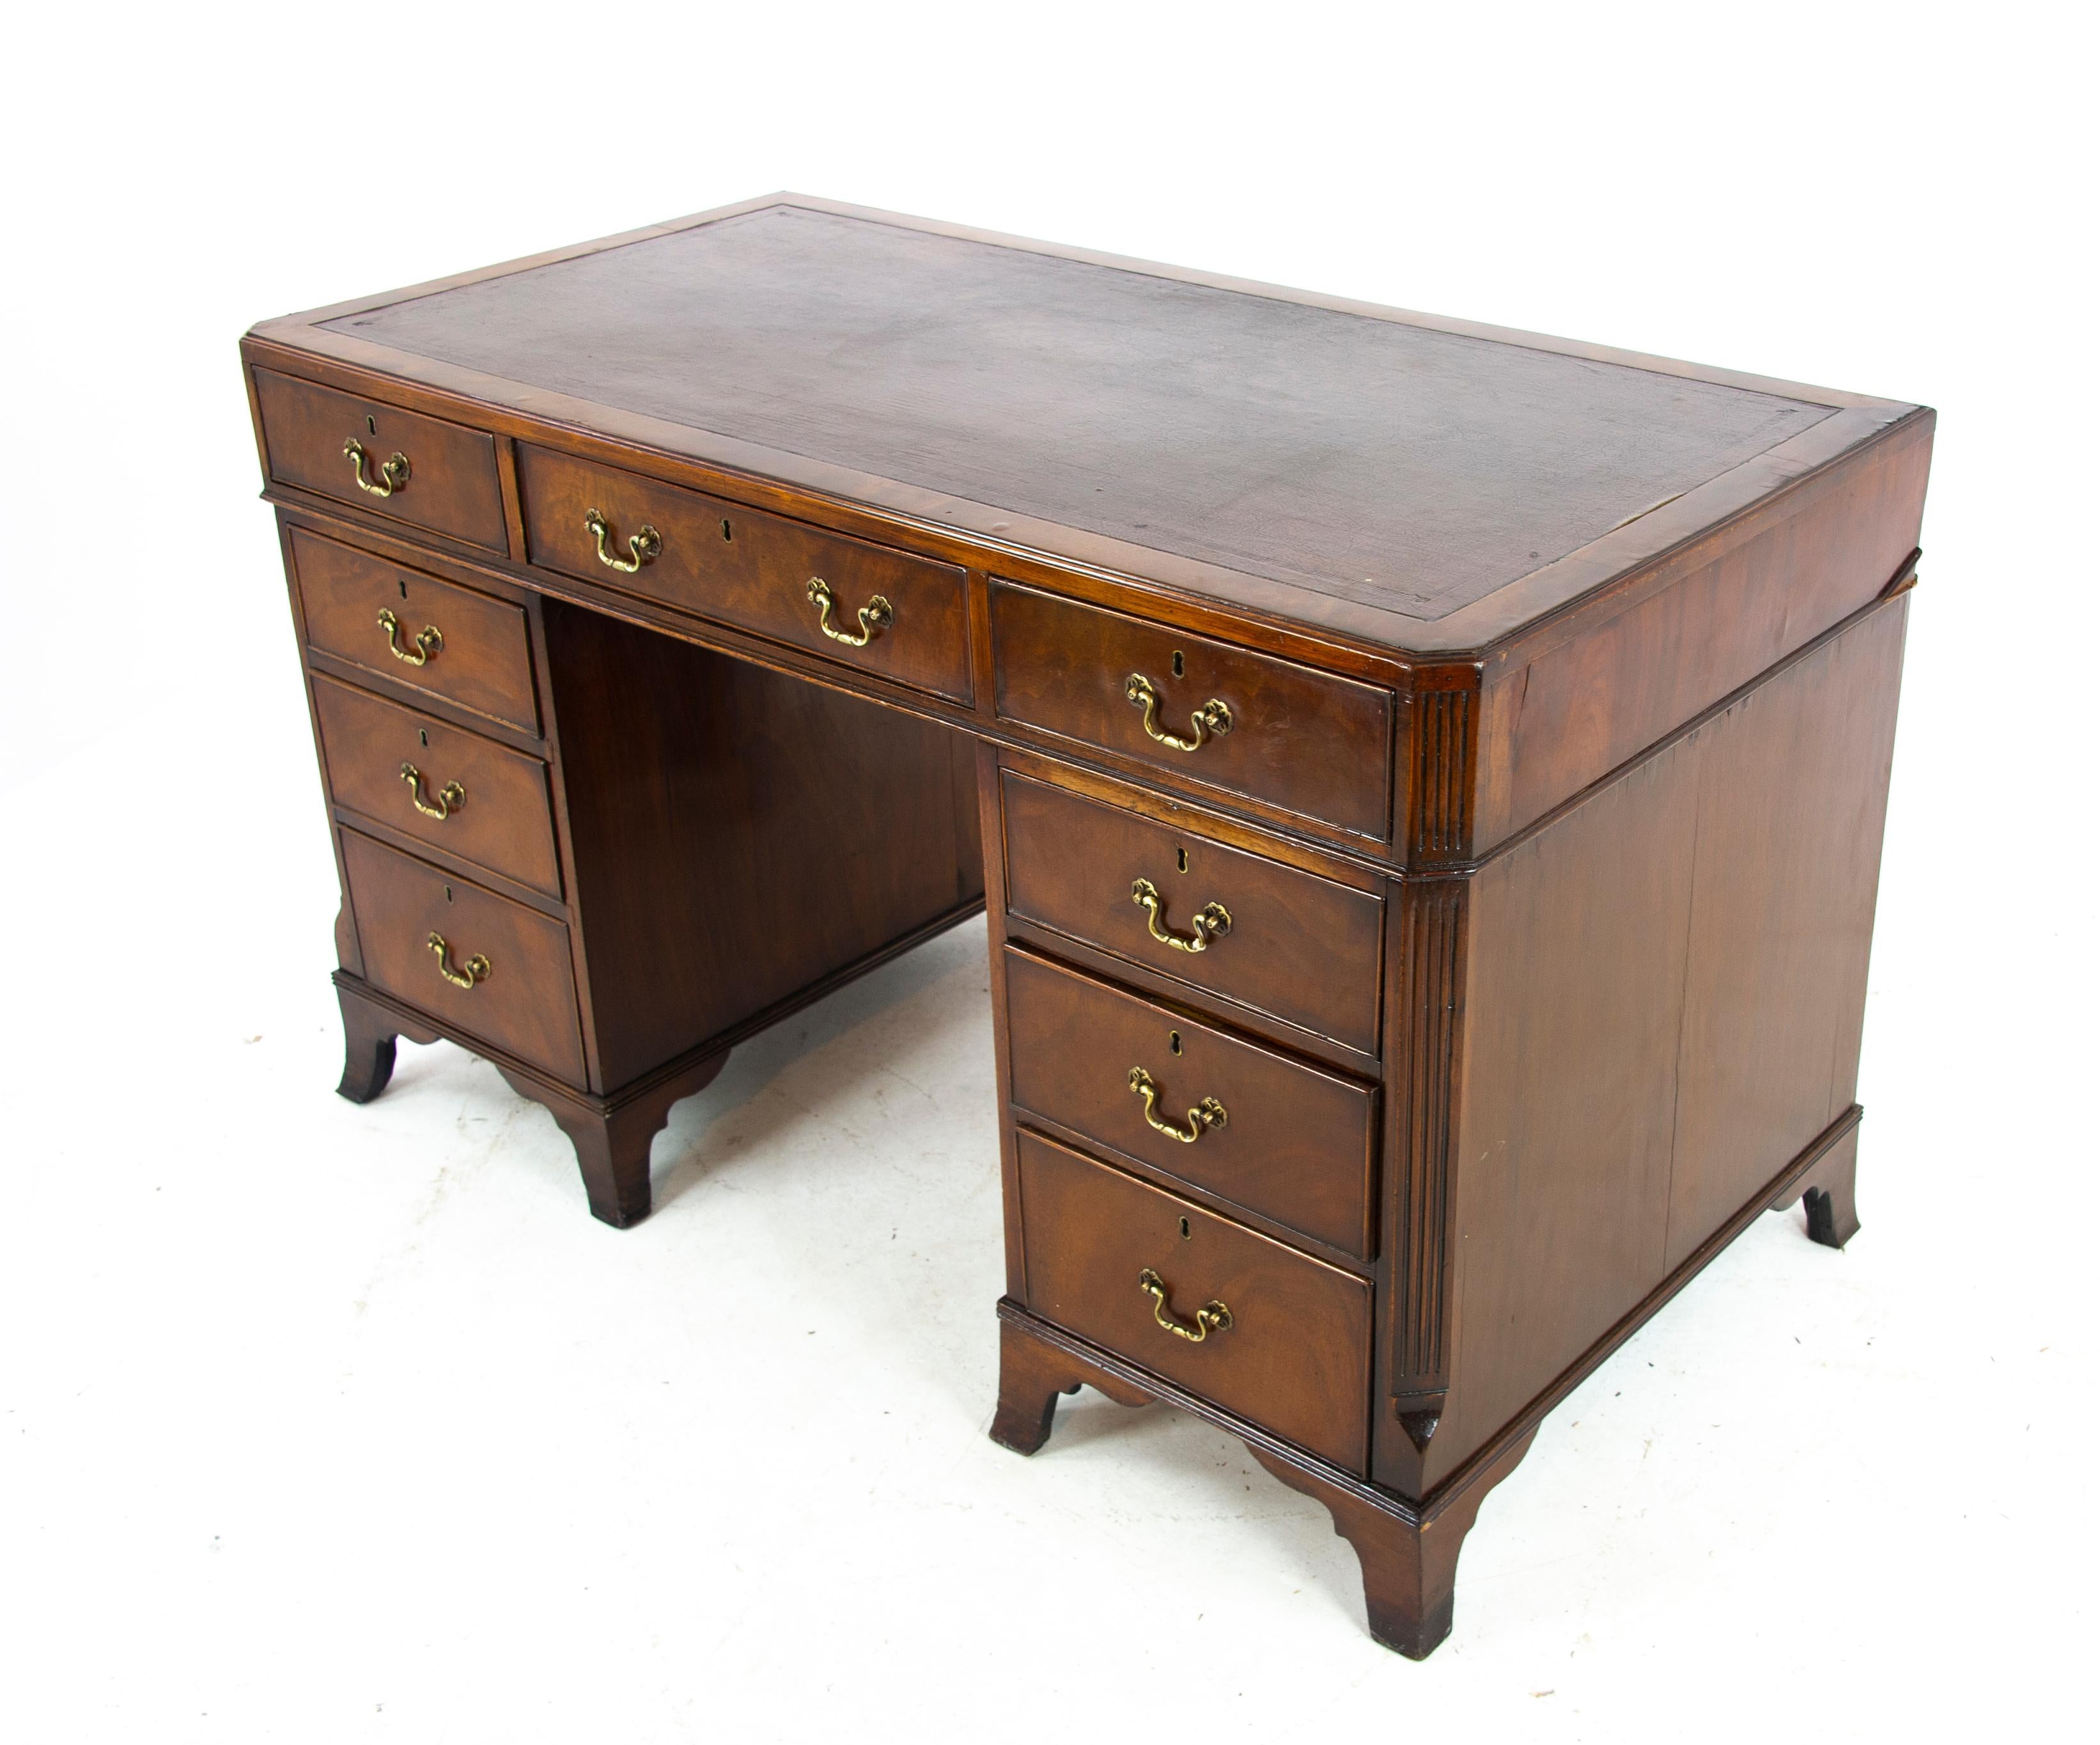 Hand-Crafted Double Pedestal Desk, Walnut Desk, Leather Top, Scotland, 1920, Antiques, B1283